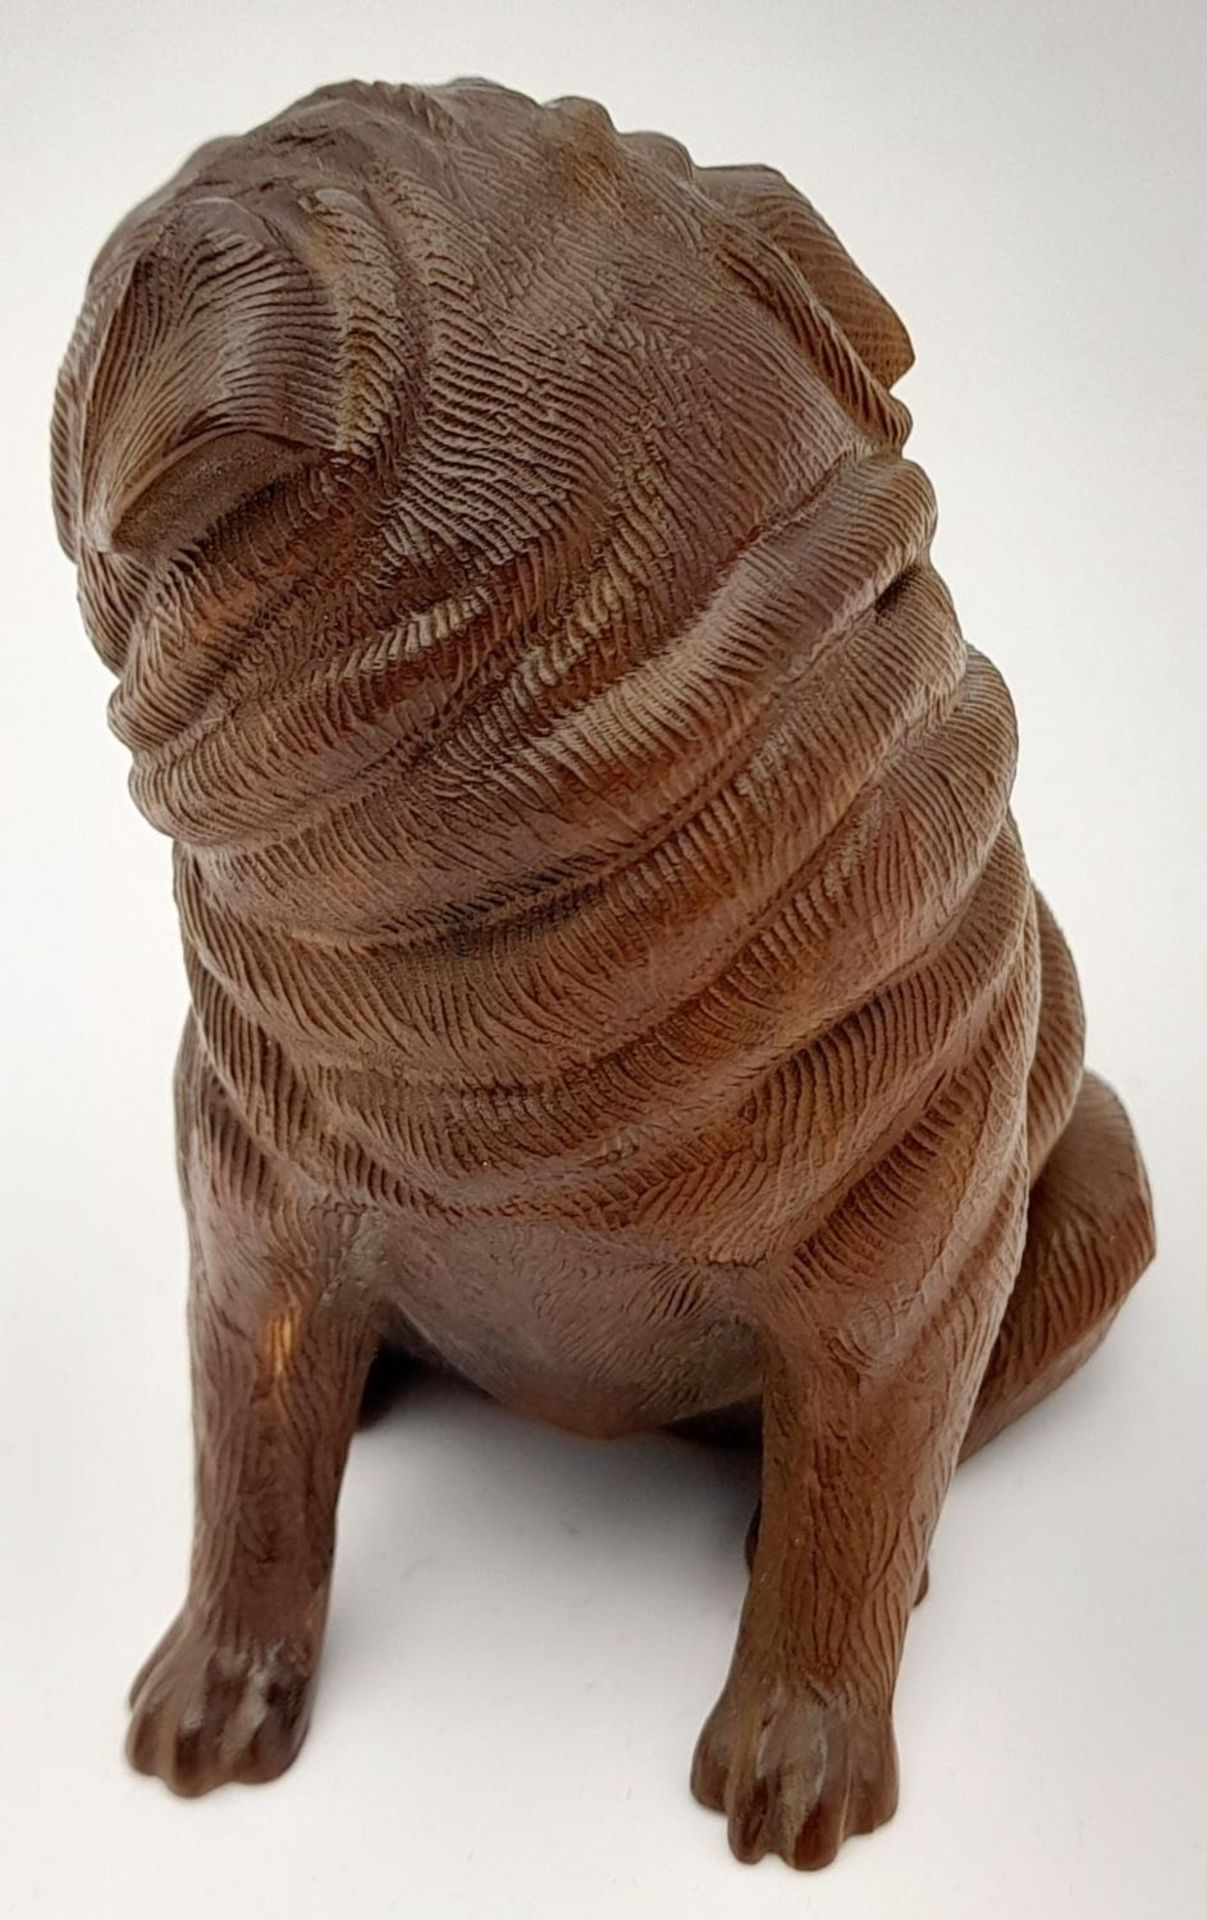 A very collectable, exquisitely hand carved on box wood Pug dog with amazing detail. Probably of - Image 2 of 6